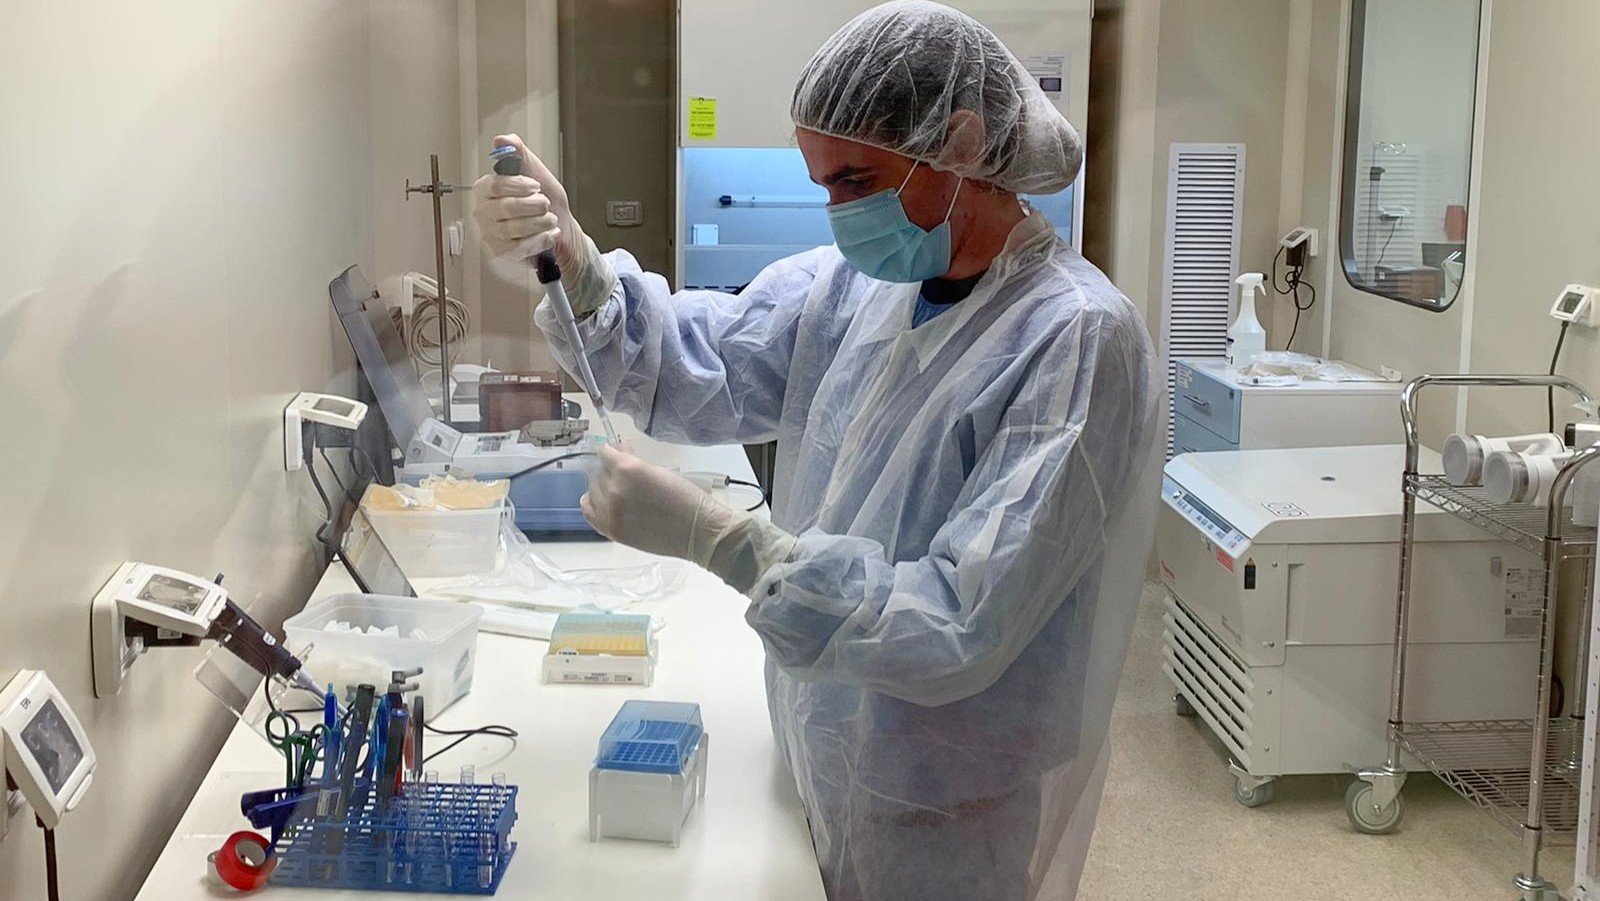 An Enlivex employee turning human donor cells into an immunotherapy treatment called Allocetra. Photo: courtesy